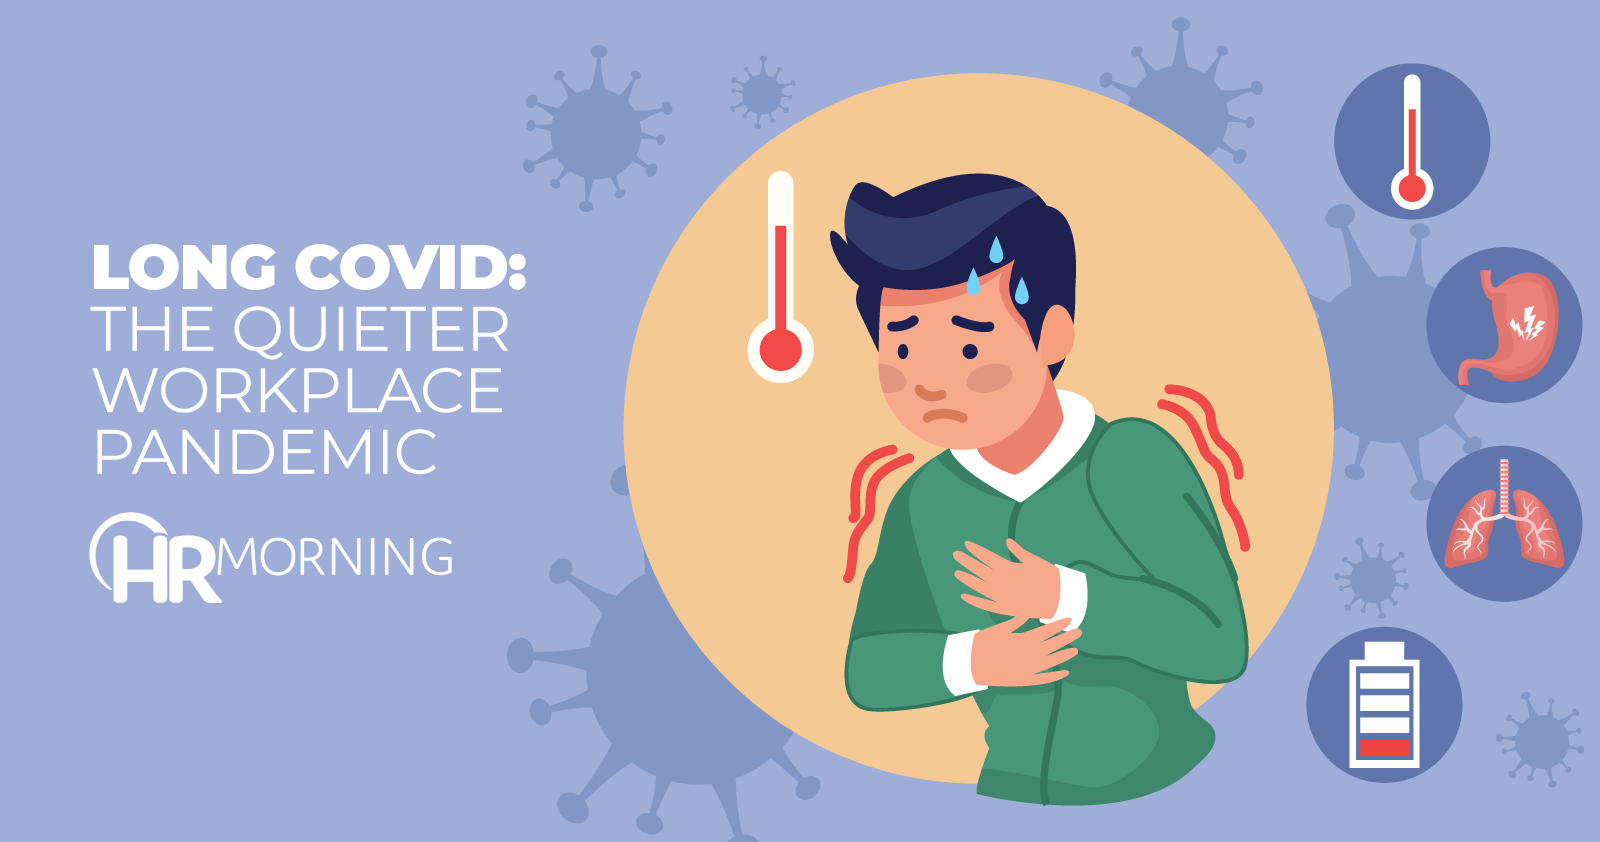 Long COVID: The Quieter Workplace Pandemic.